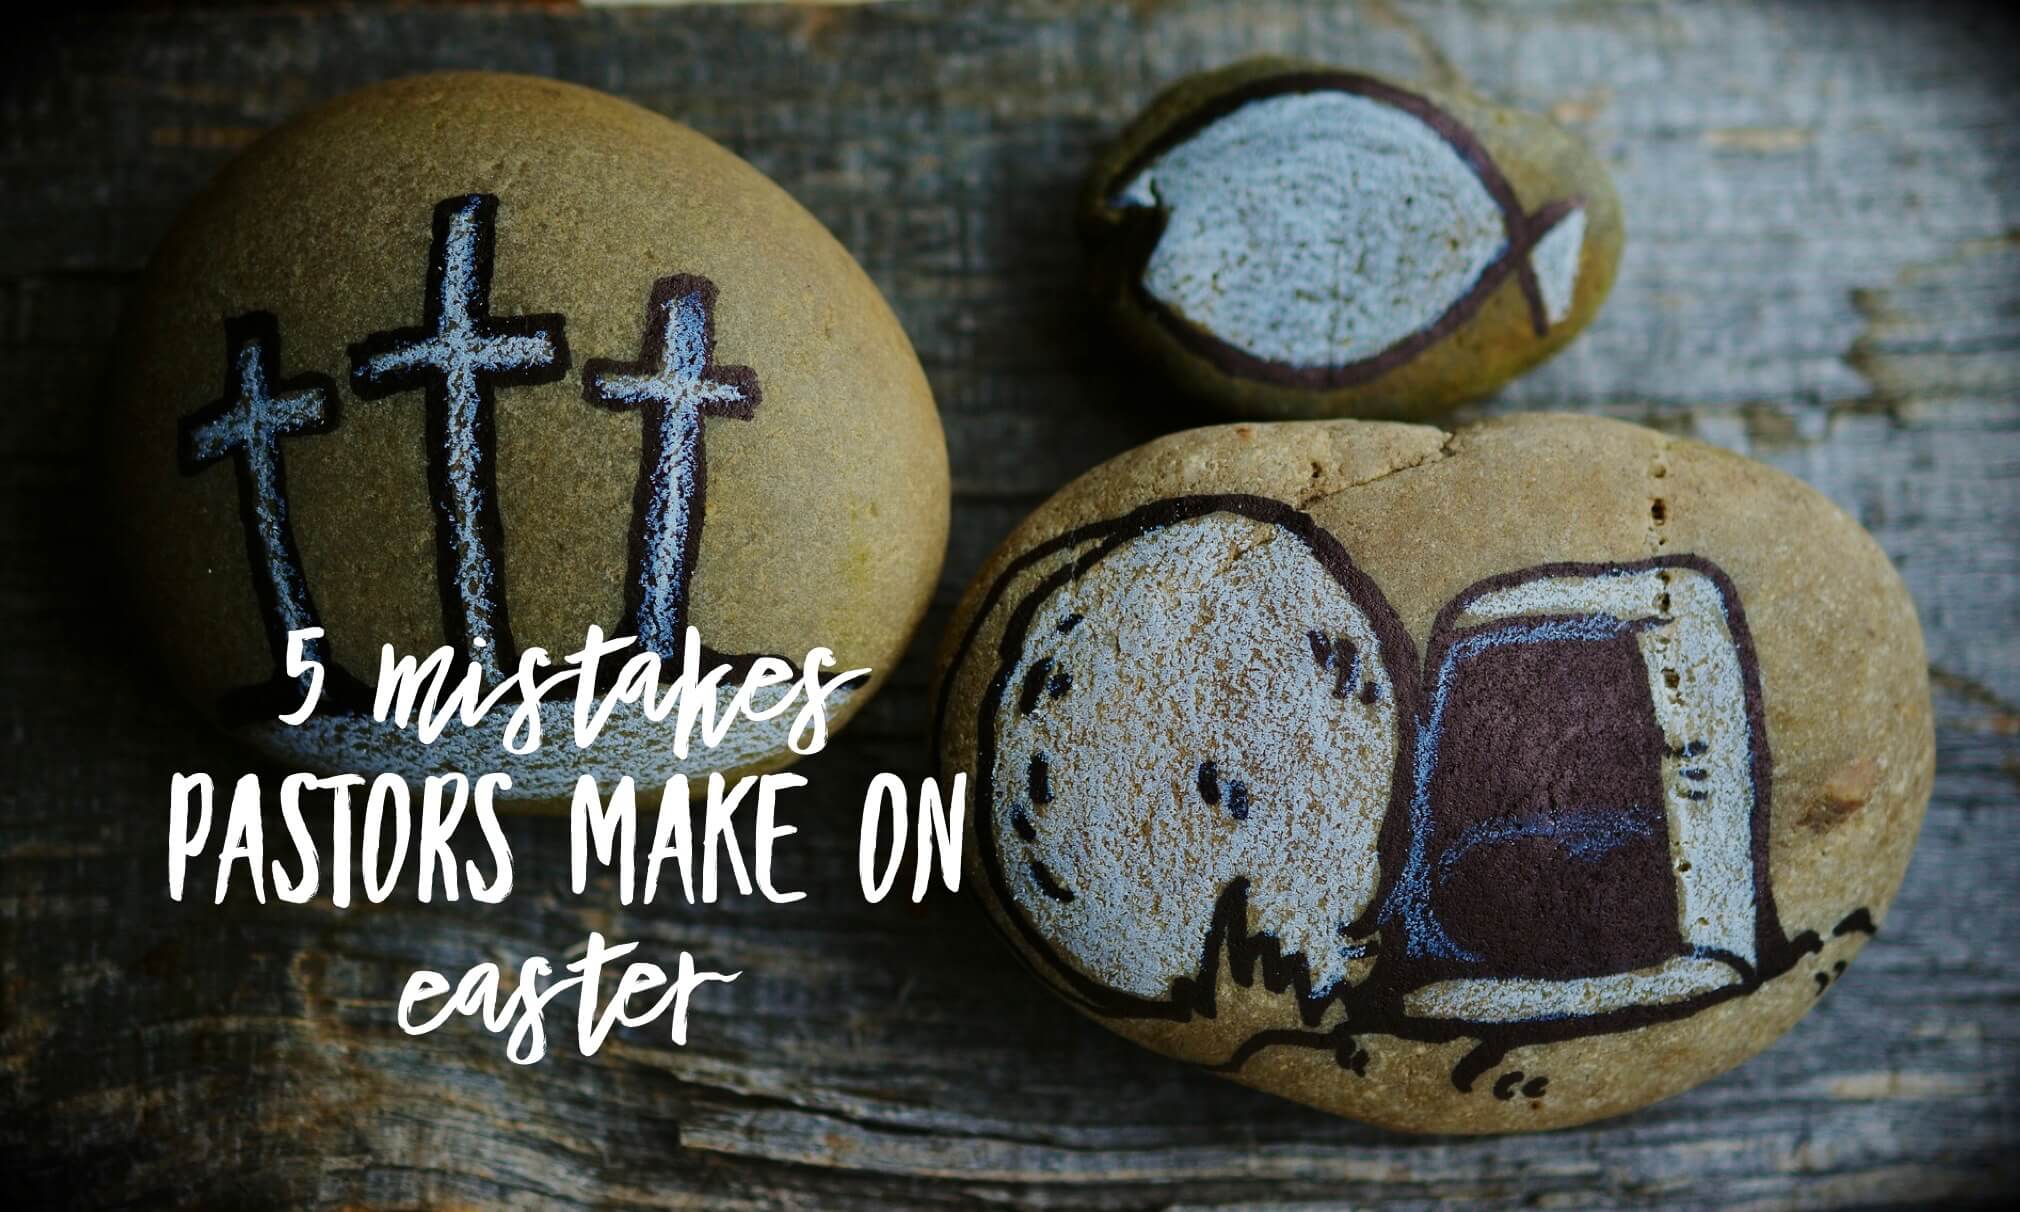 5 Big Mistakes Pastors Make on Easter (and How to Avoid Them)